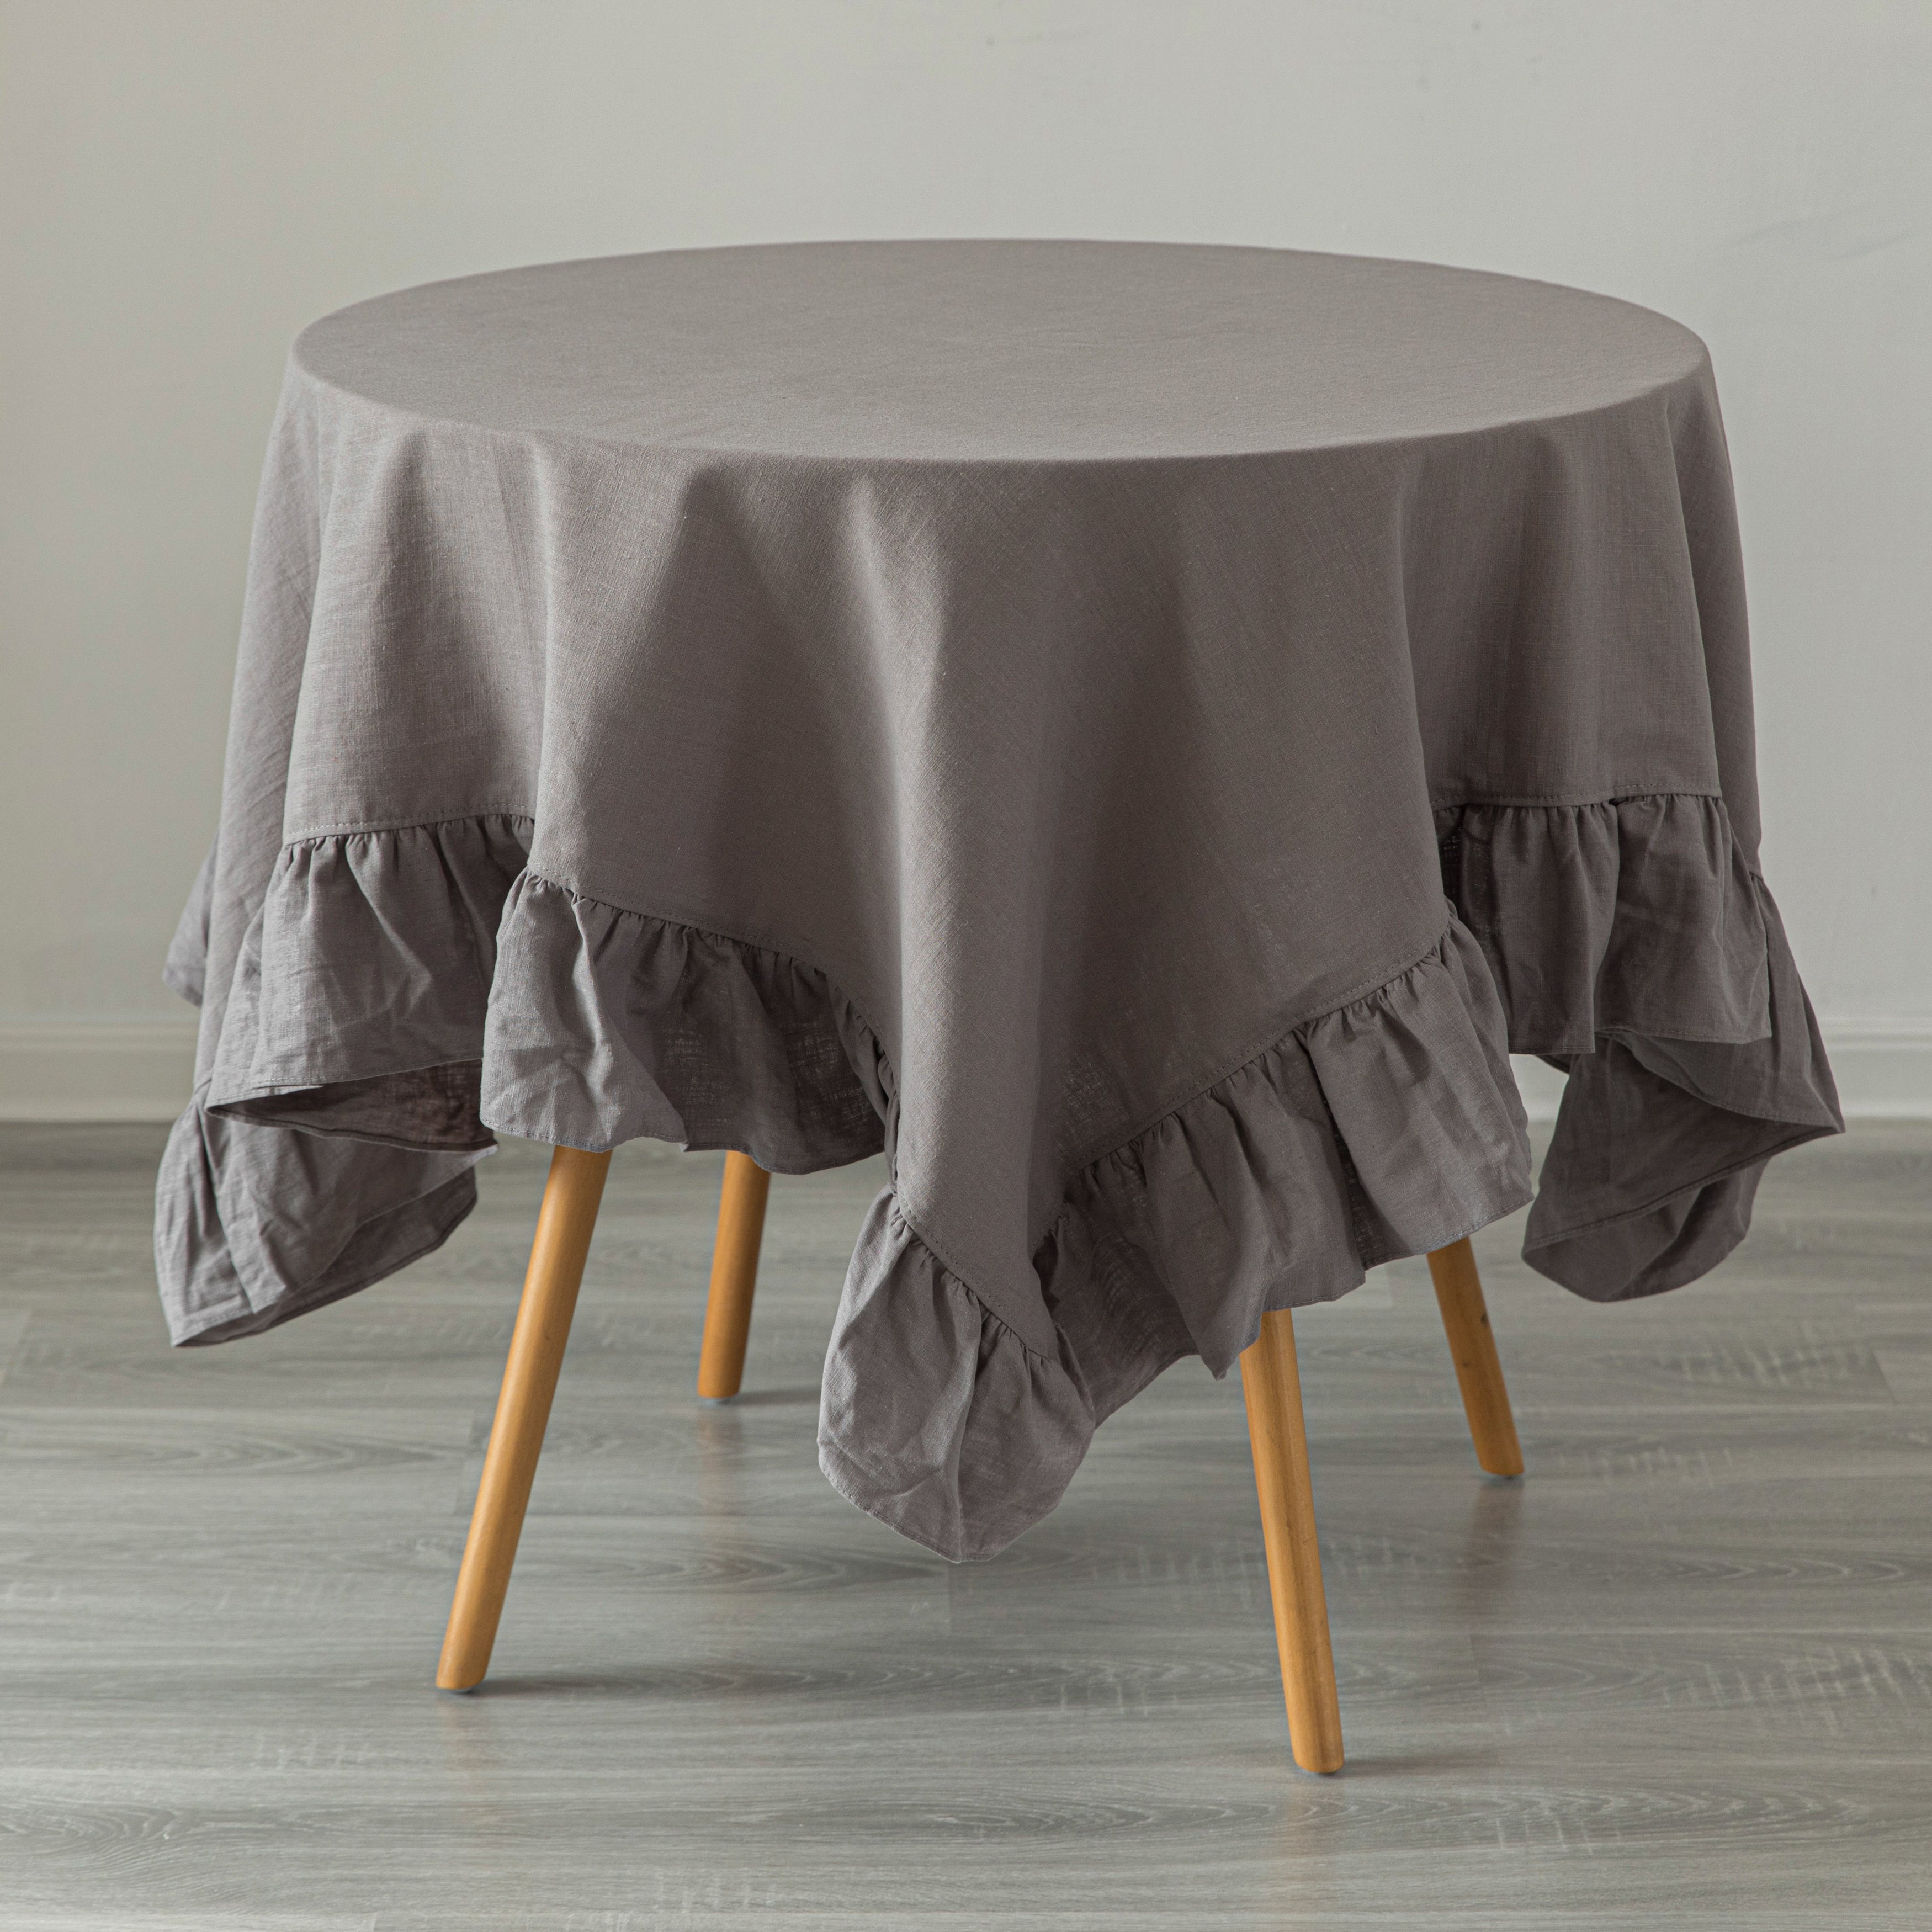 Deerlux 100 Percent Pure Linen Washable Tablecloth With Ruffle Trim - 70 X 70 In. Natural